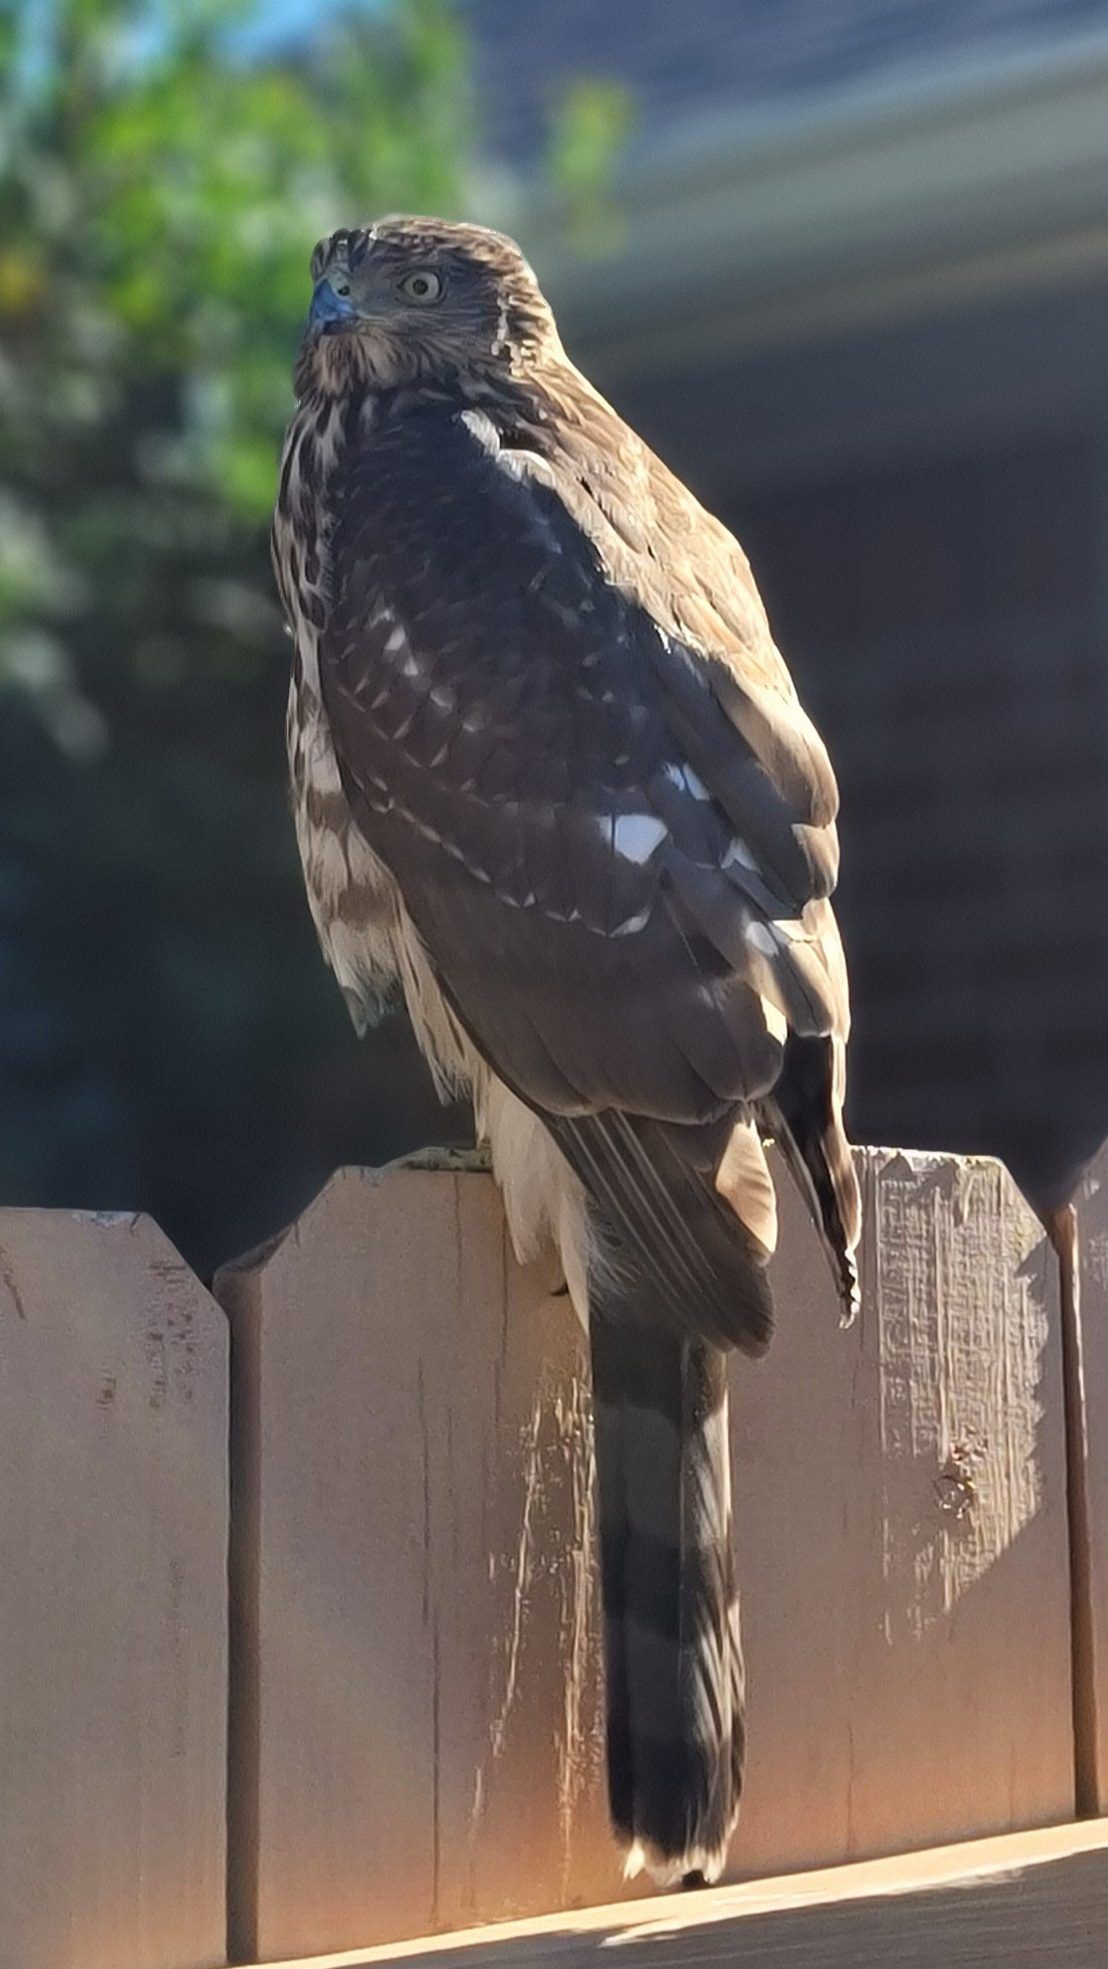 Today's Photo of the Day comes from Matthew Blalock. Matthew spotted this handsome hawk in Robledal Estates in Navarre.